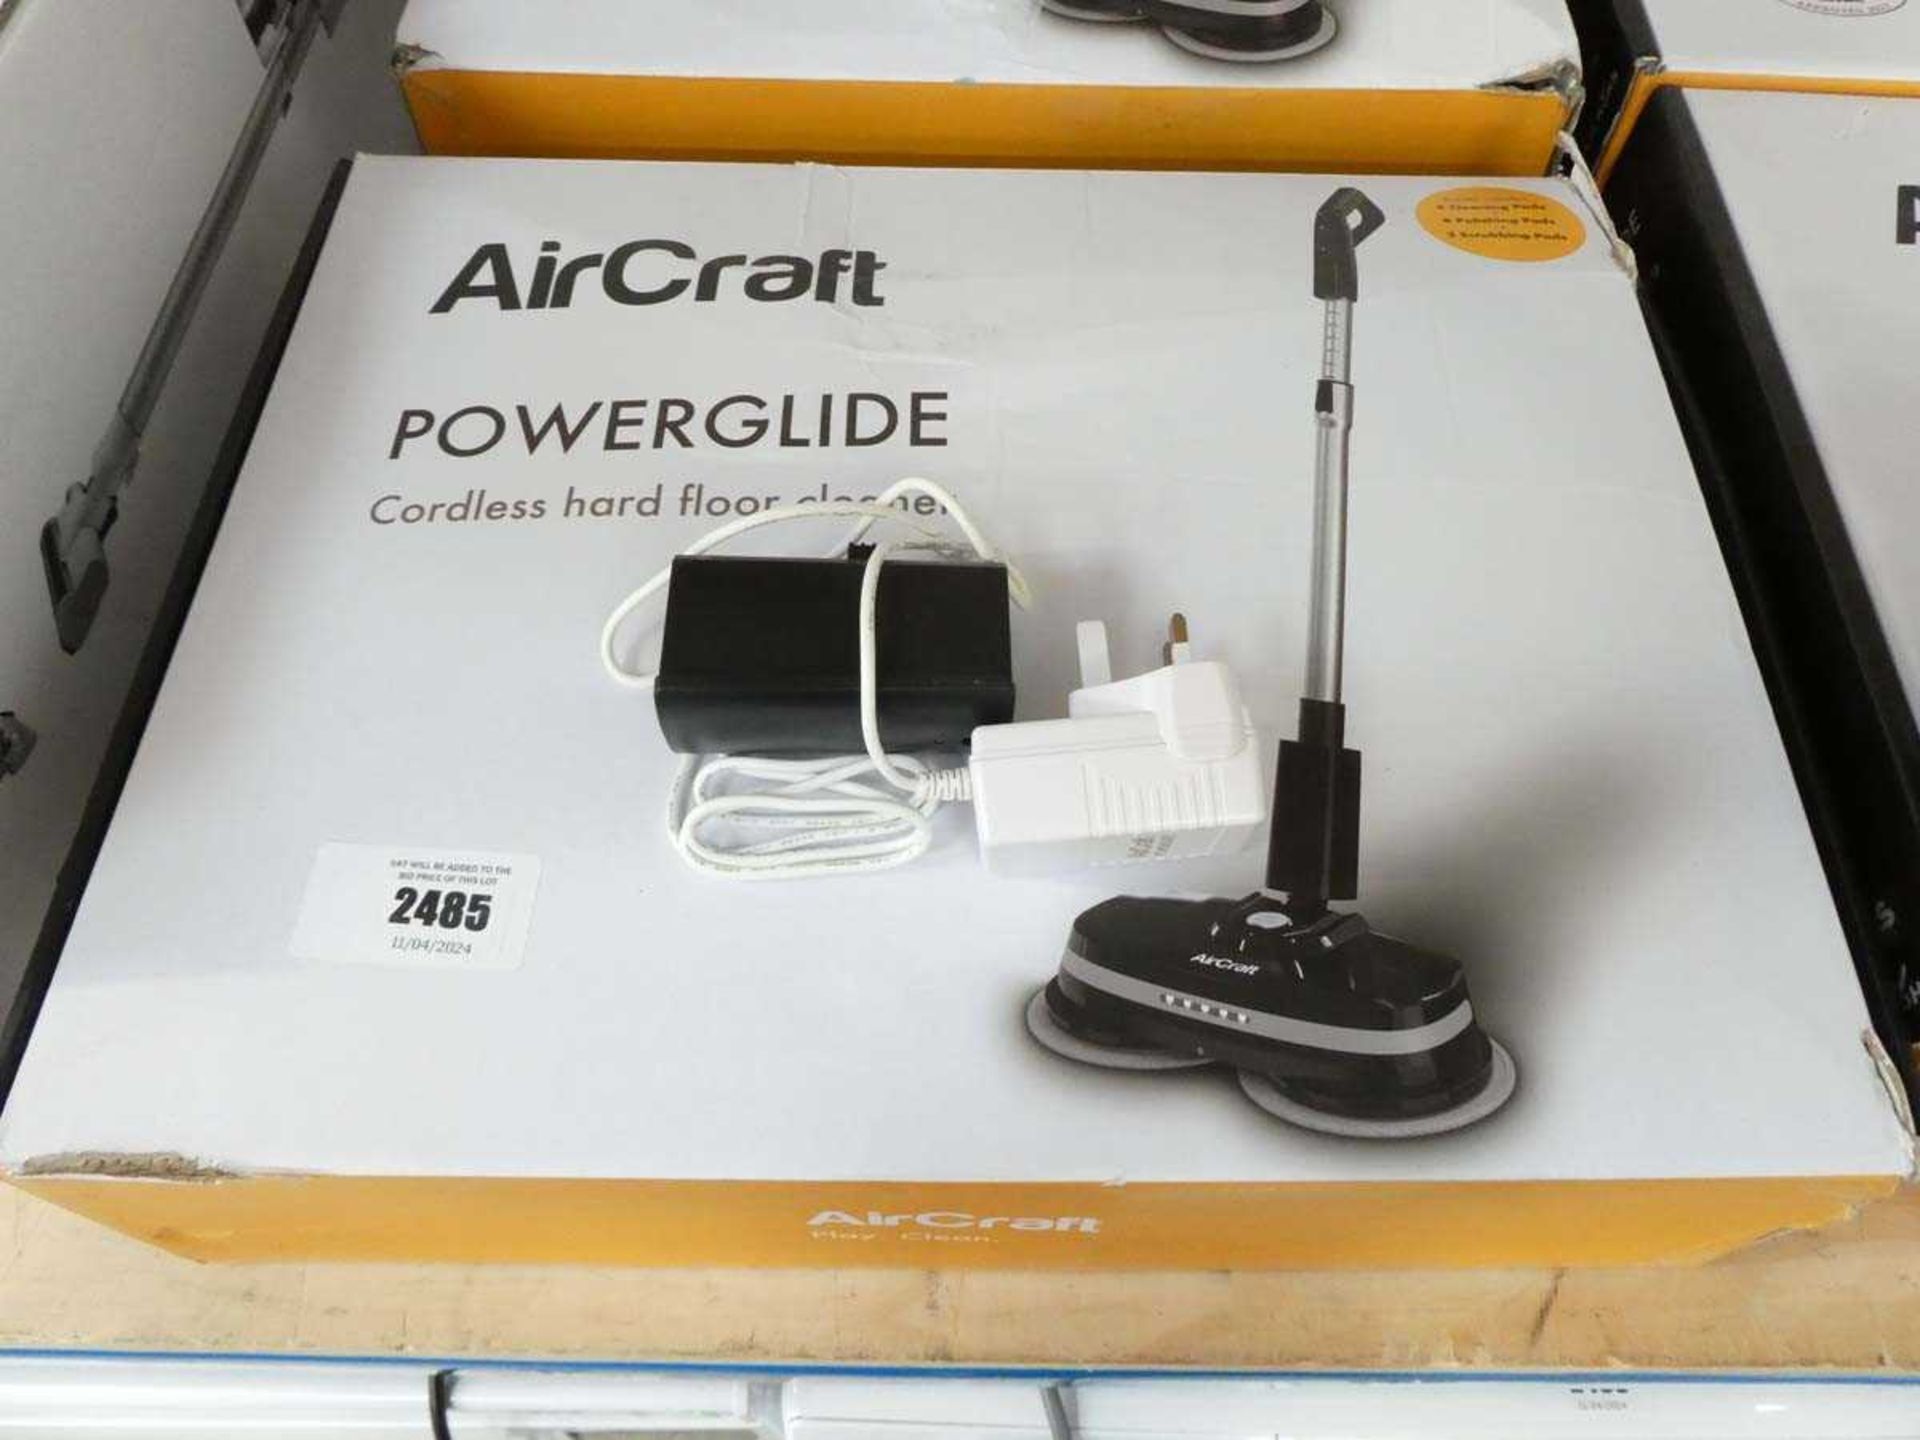 +VAT Boxed AirCraft PowerGlide cordless hard floor cleaner with charger and battery